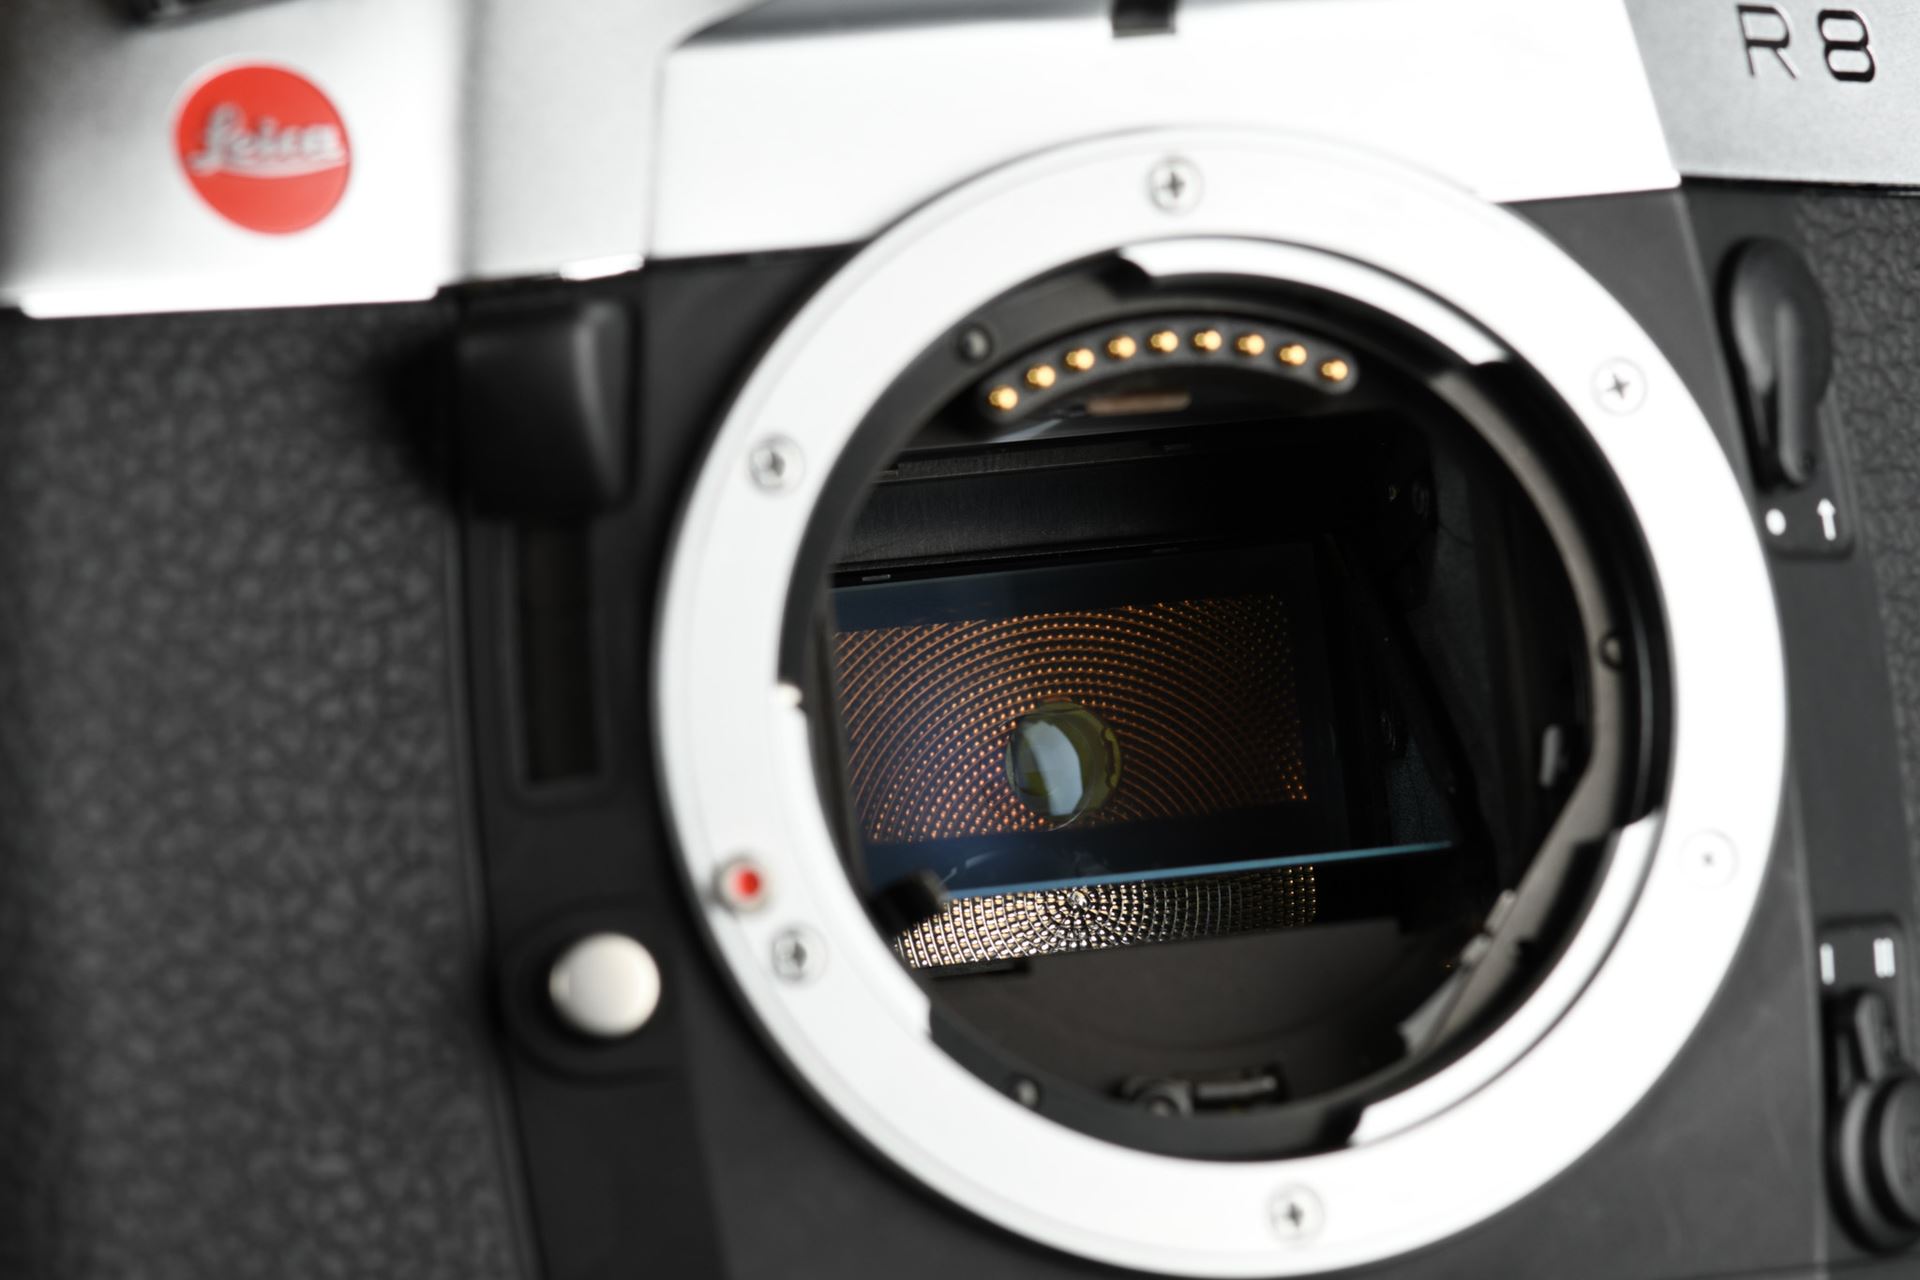 Picture of Leica R8 Silver (10080)